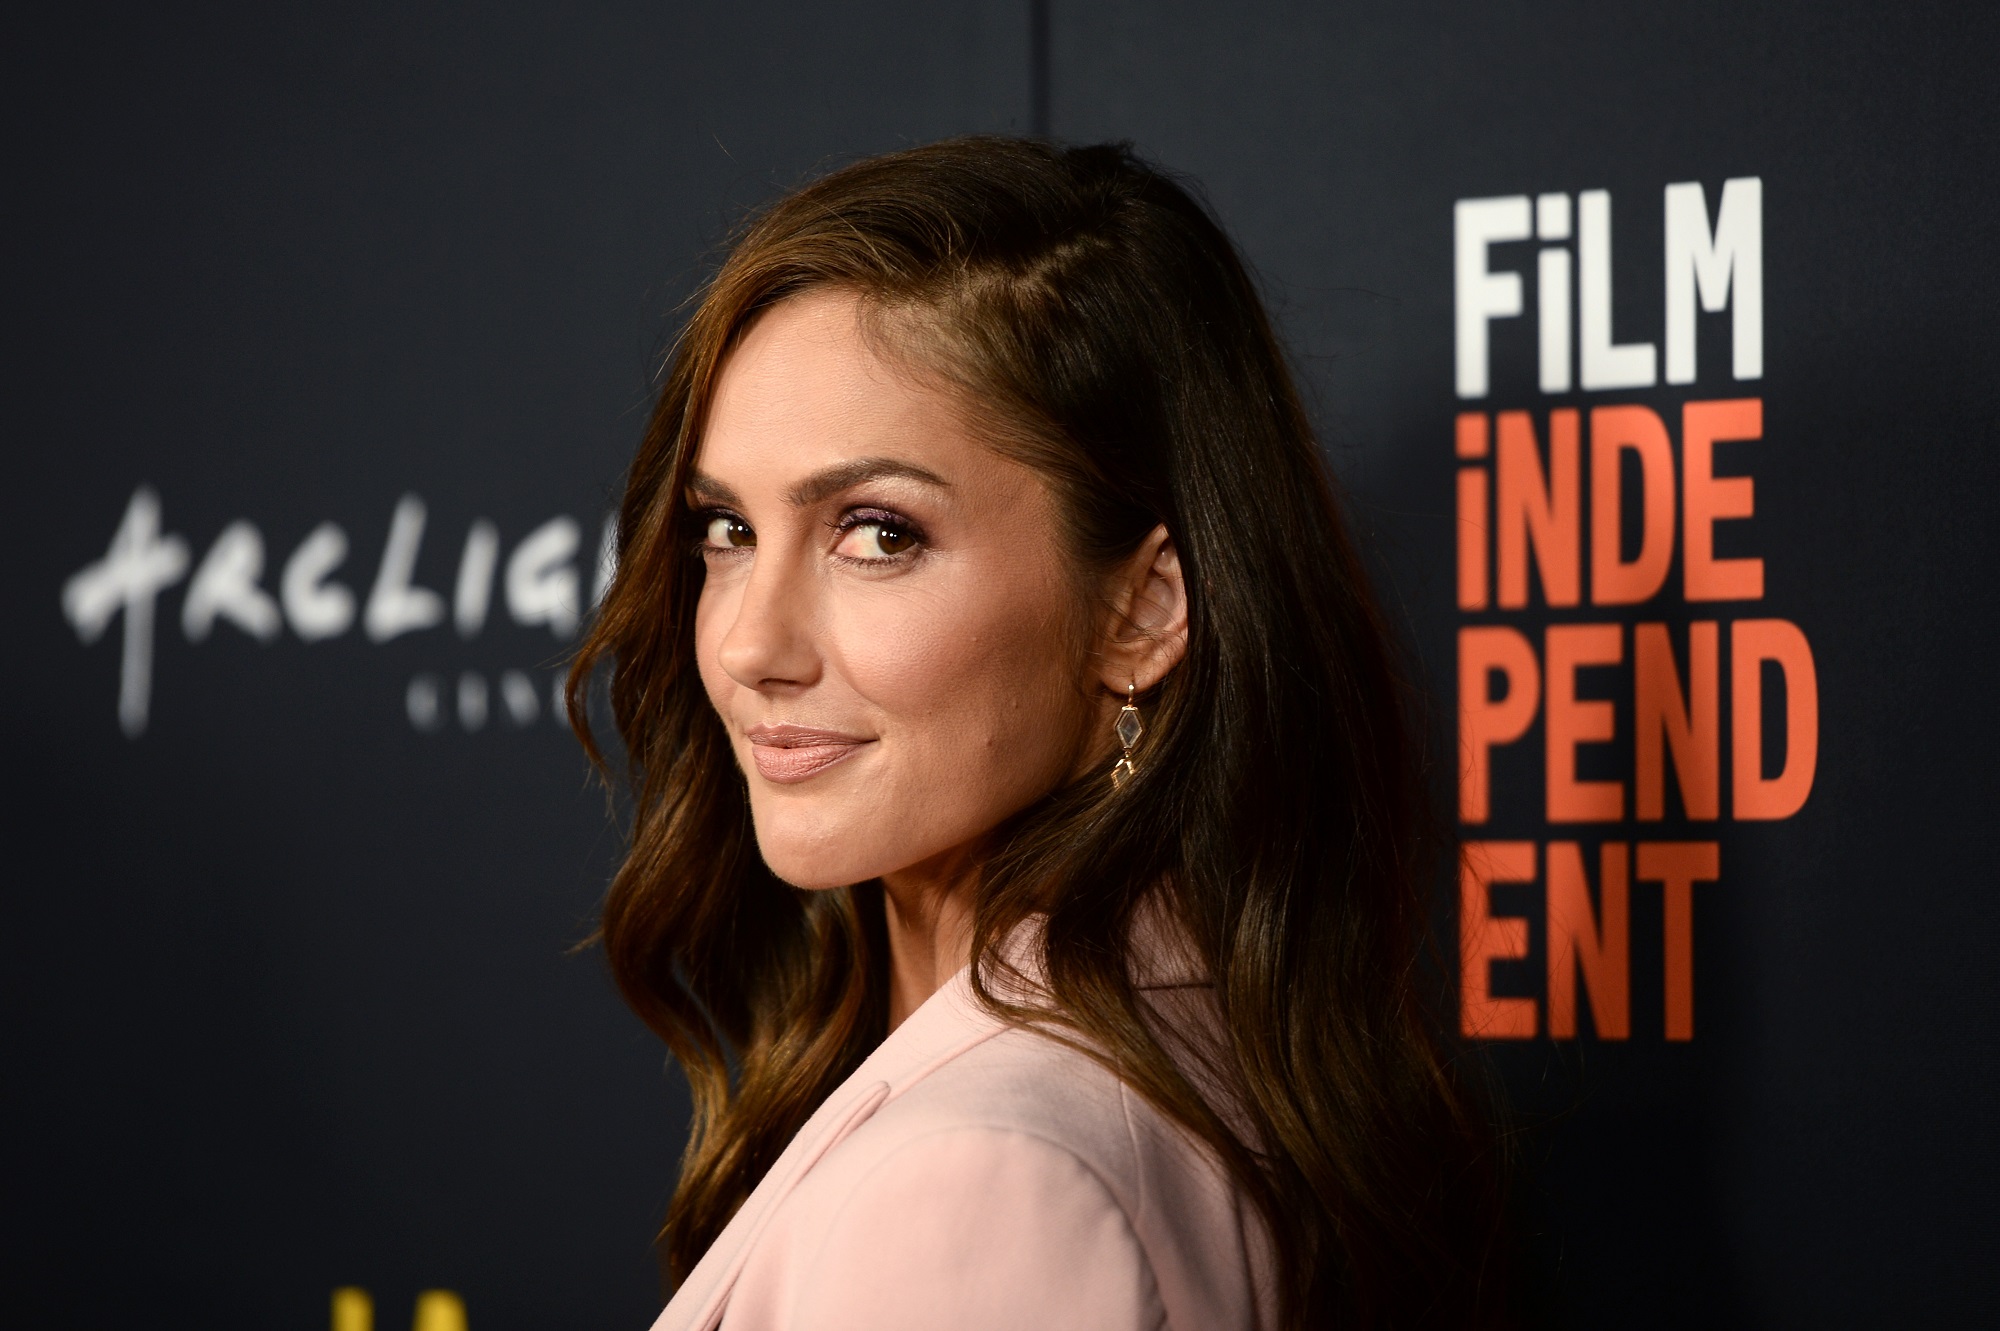 Minka Kelly attends the Closing Night Screening of 'Nomis' during the 2018 LA Film Festival on September 28, 2018 in Hollywood, California.